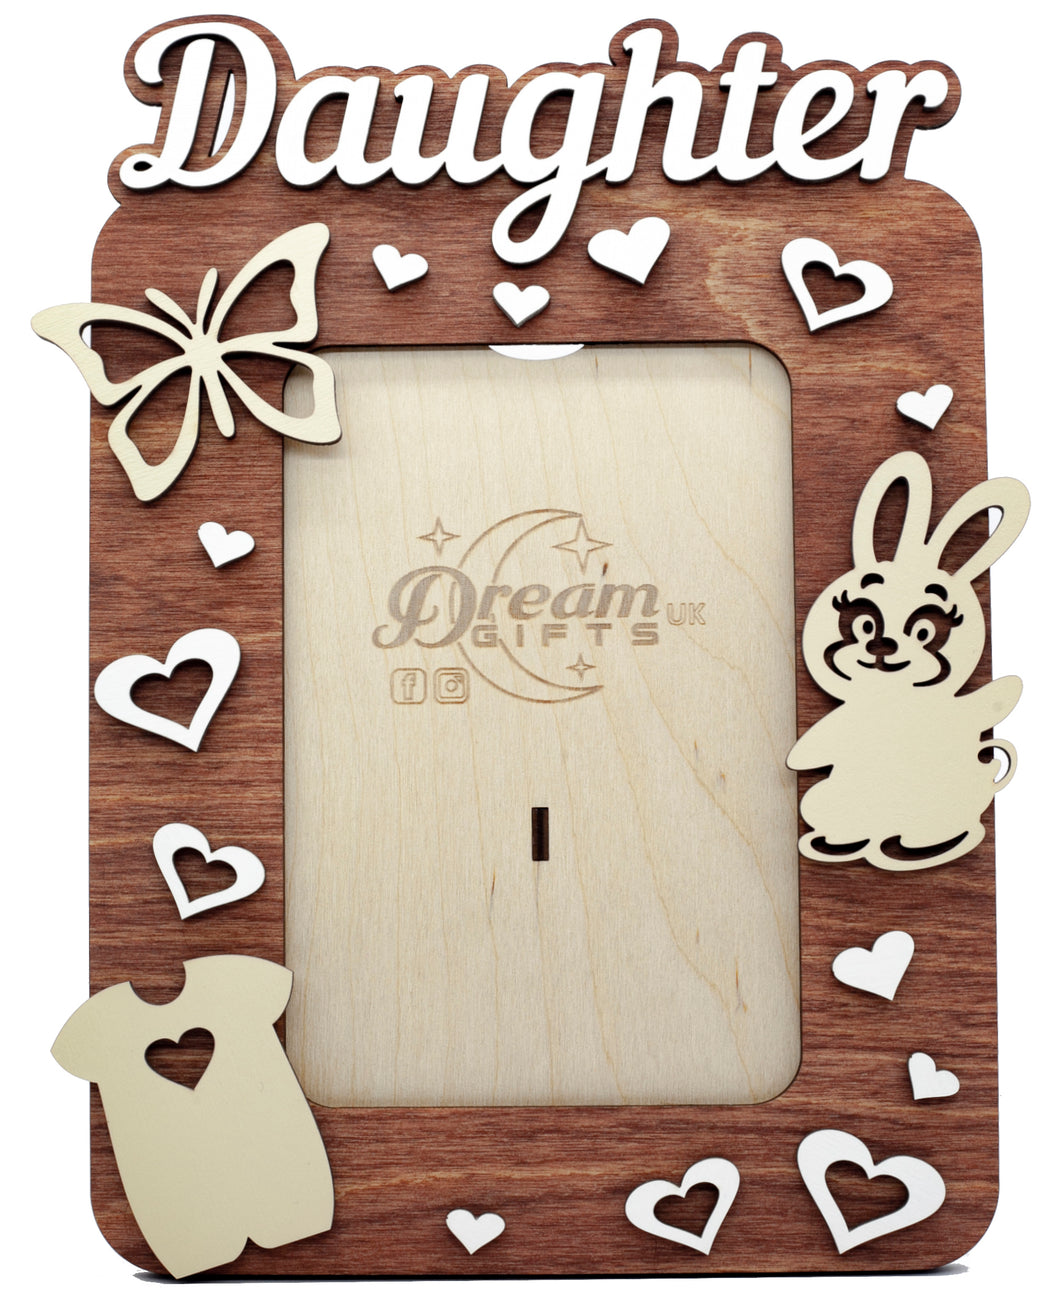 Daughter Baby Wooden Photo Frame Handmade for Tabletop Wall Decorative Gift - babycomfort.co.uk